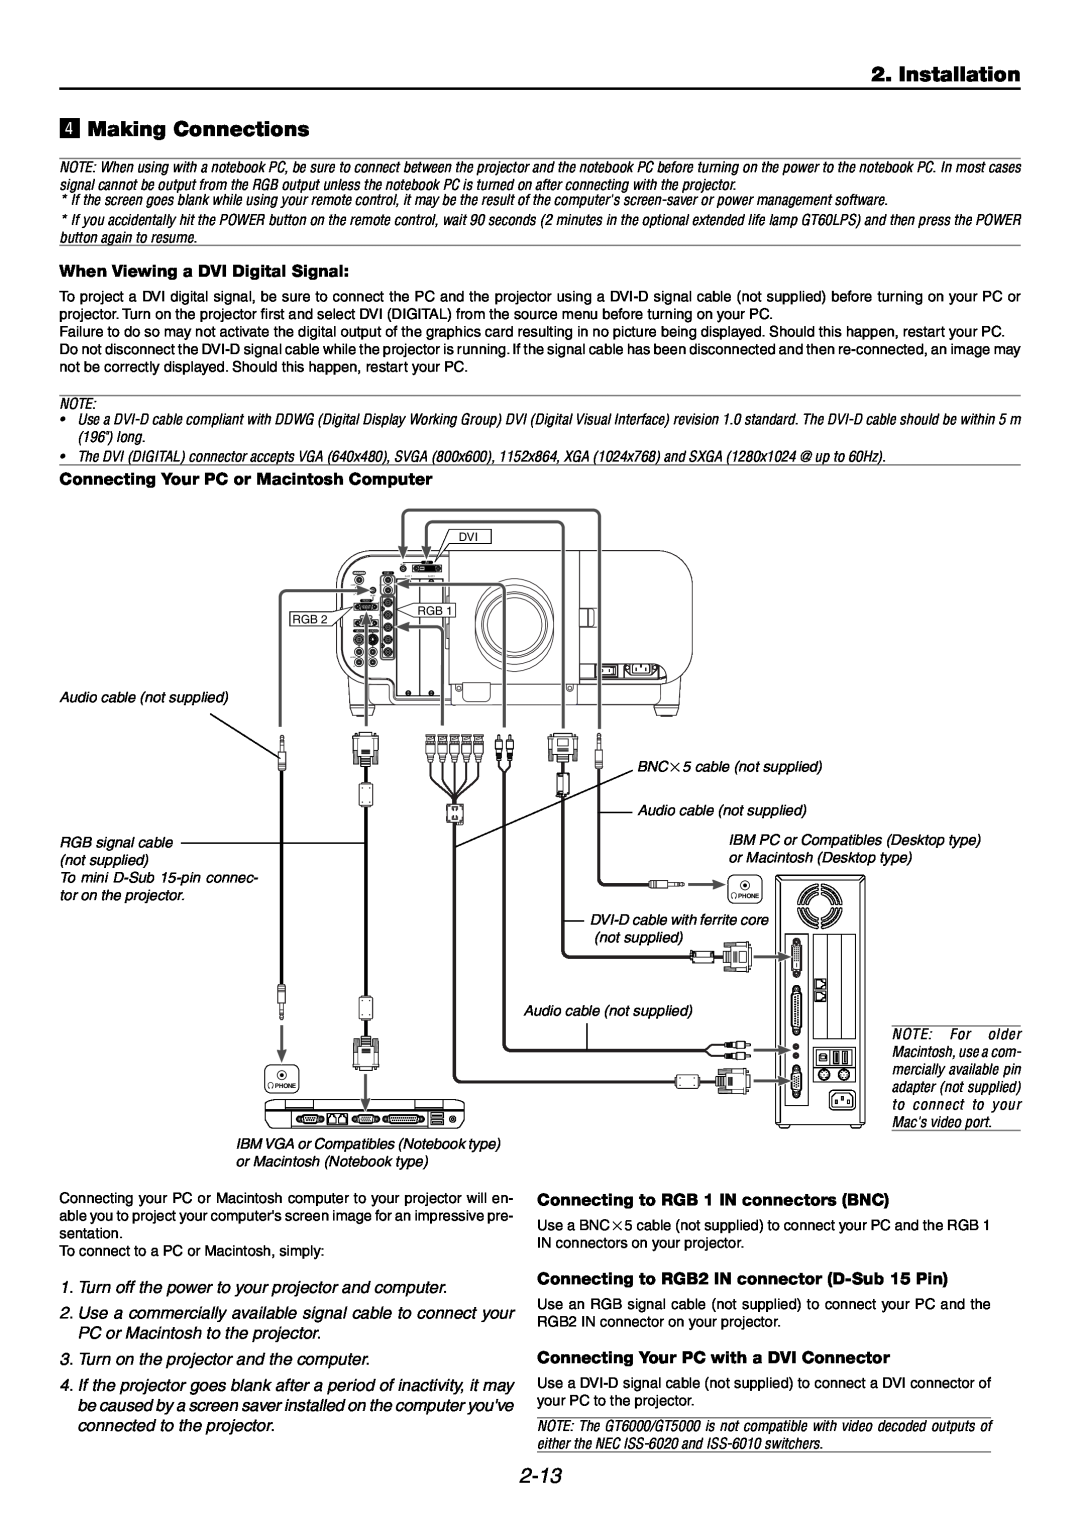 NEC GT6000 user manual Installation v Making Connections, 2-13, When Viewing a DVI Digital Signal 